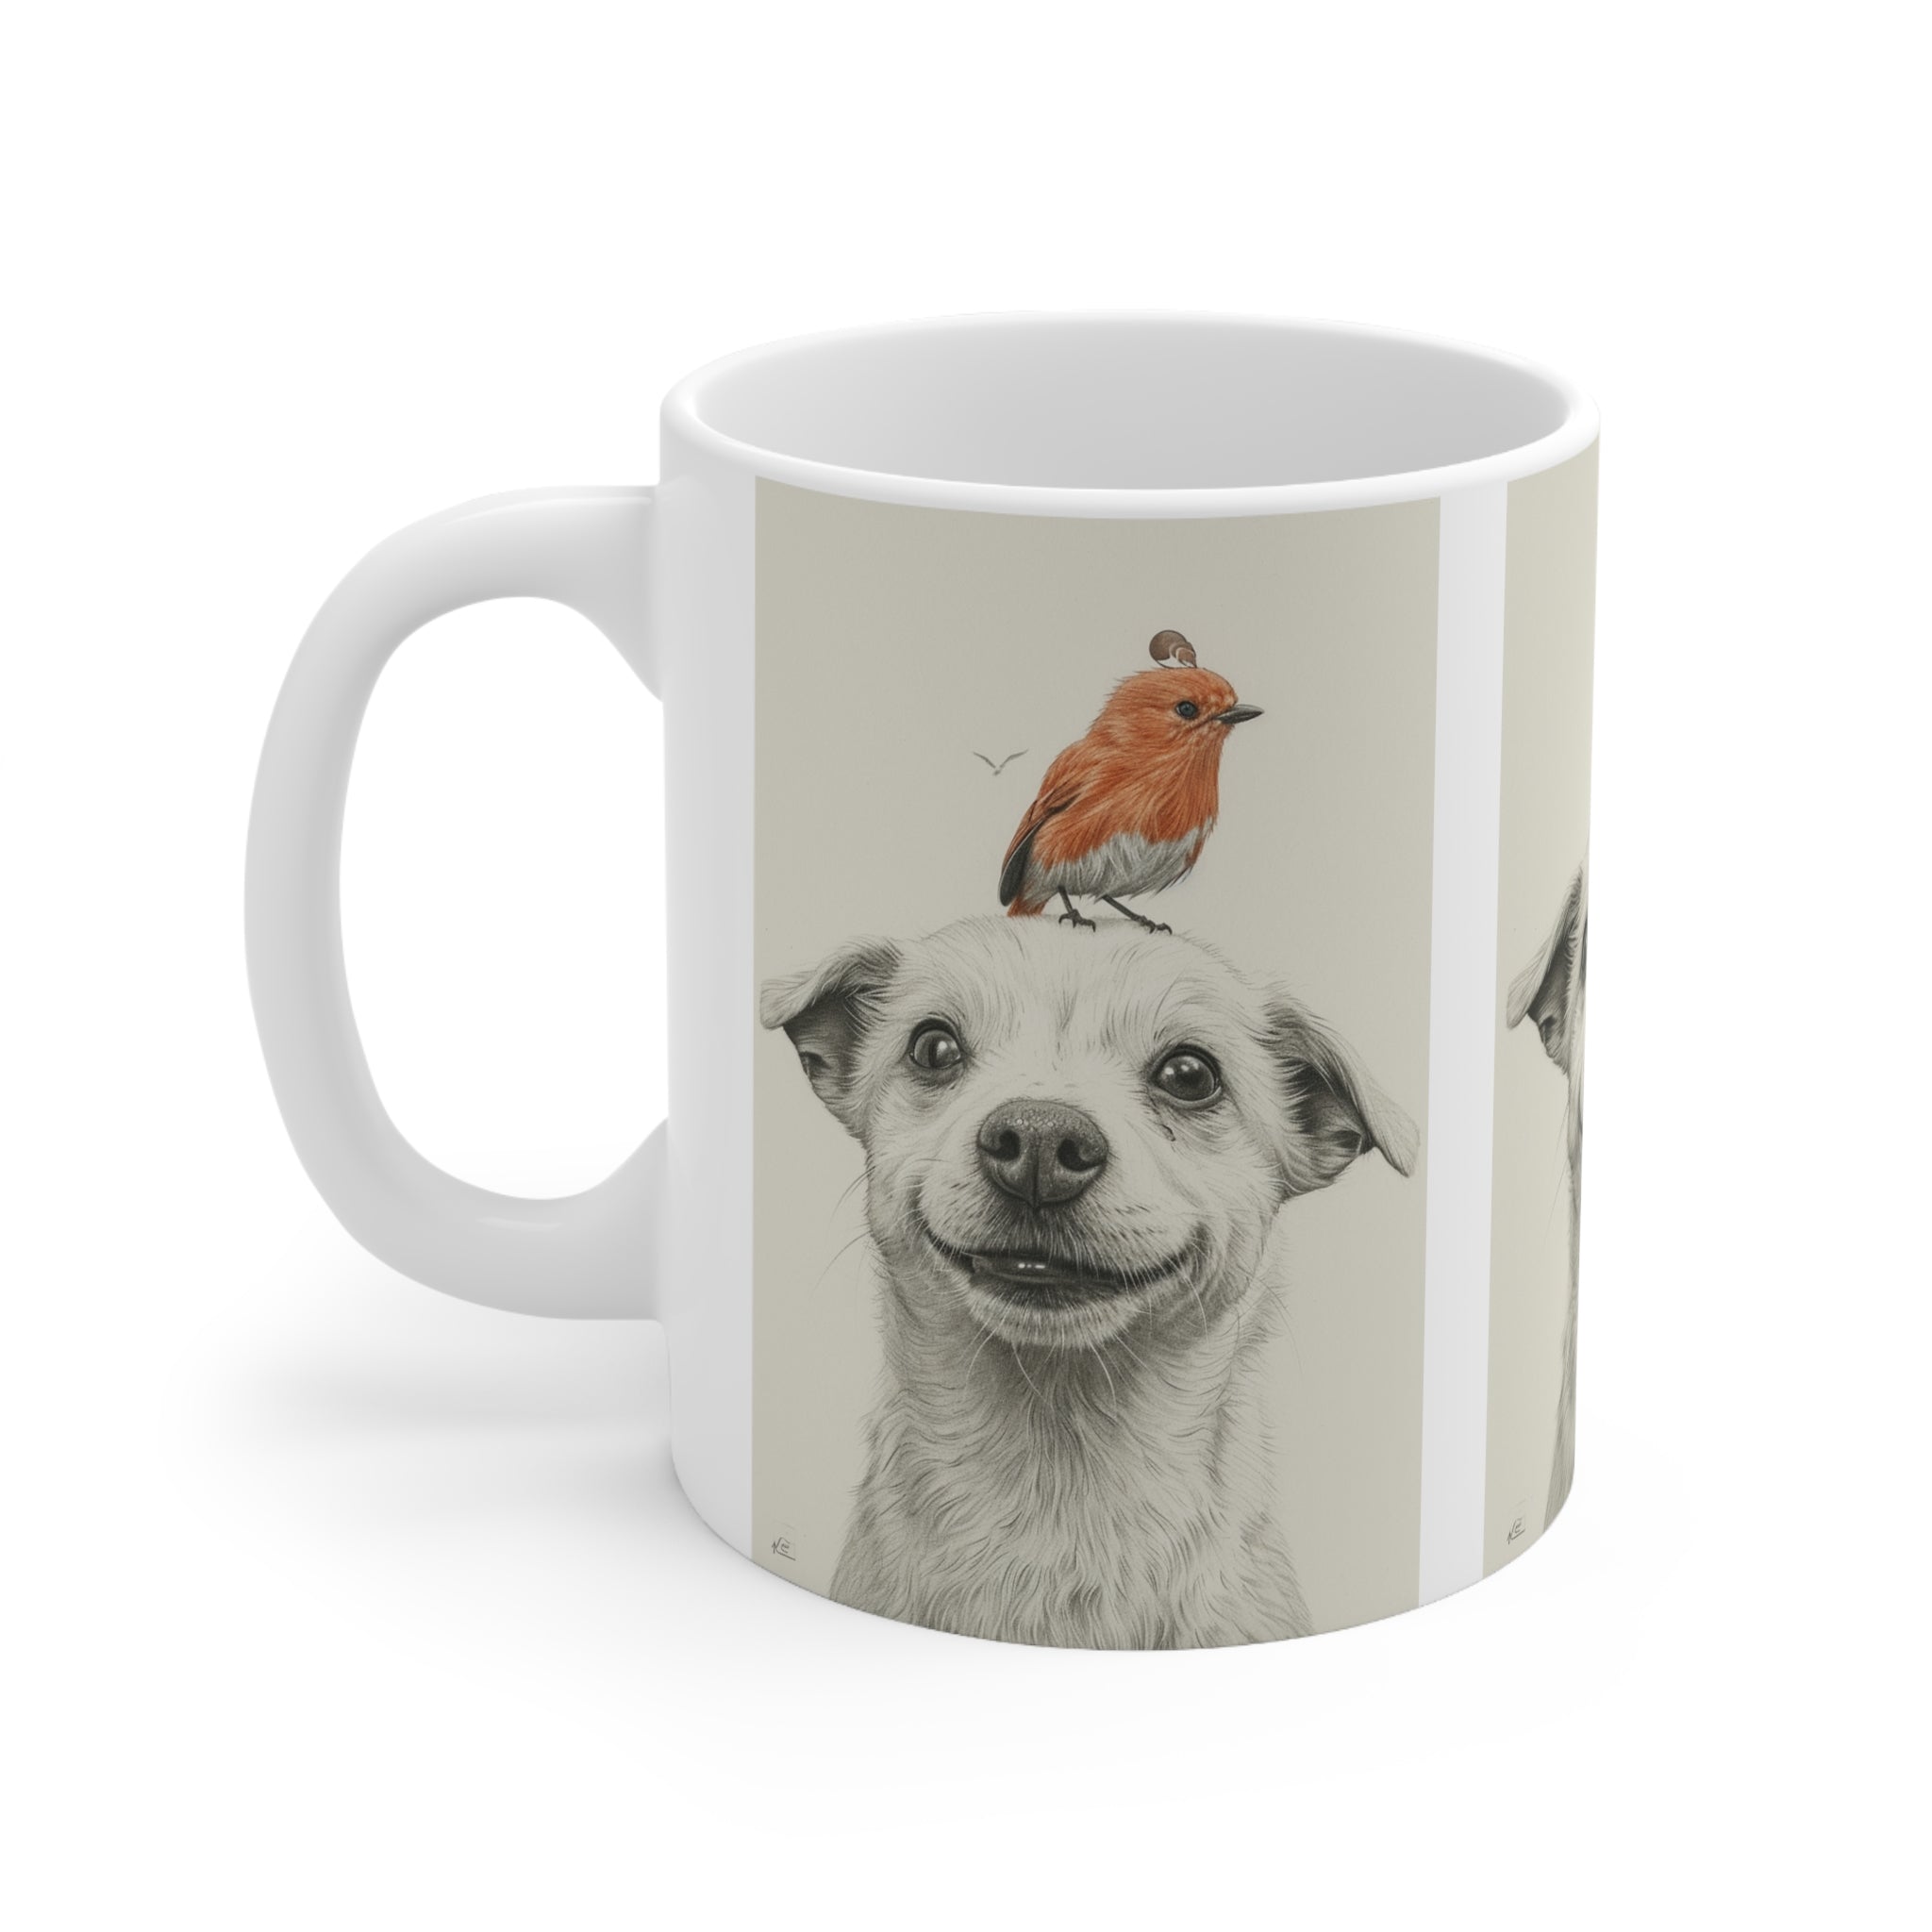 Enjoy Your Morning Brew with Canine and Avian Companionship - Dog and Bird Sidekick Ceramic Mug 11oz for Coffee Lovers